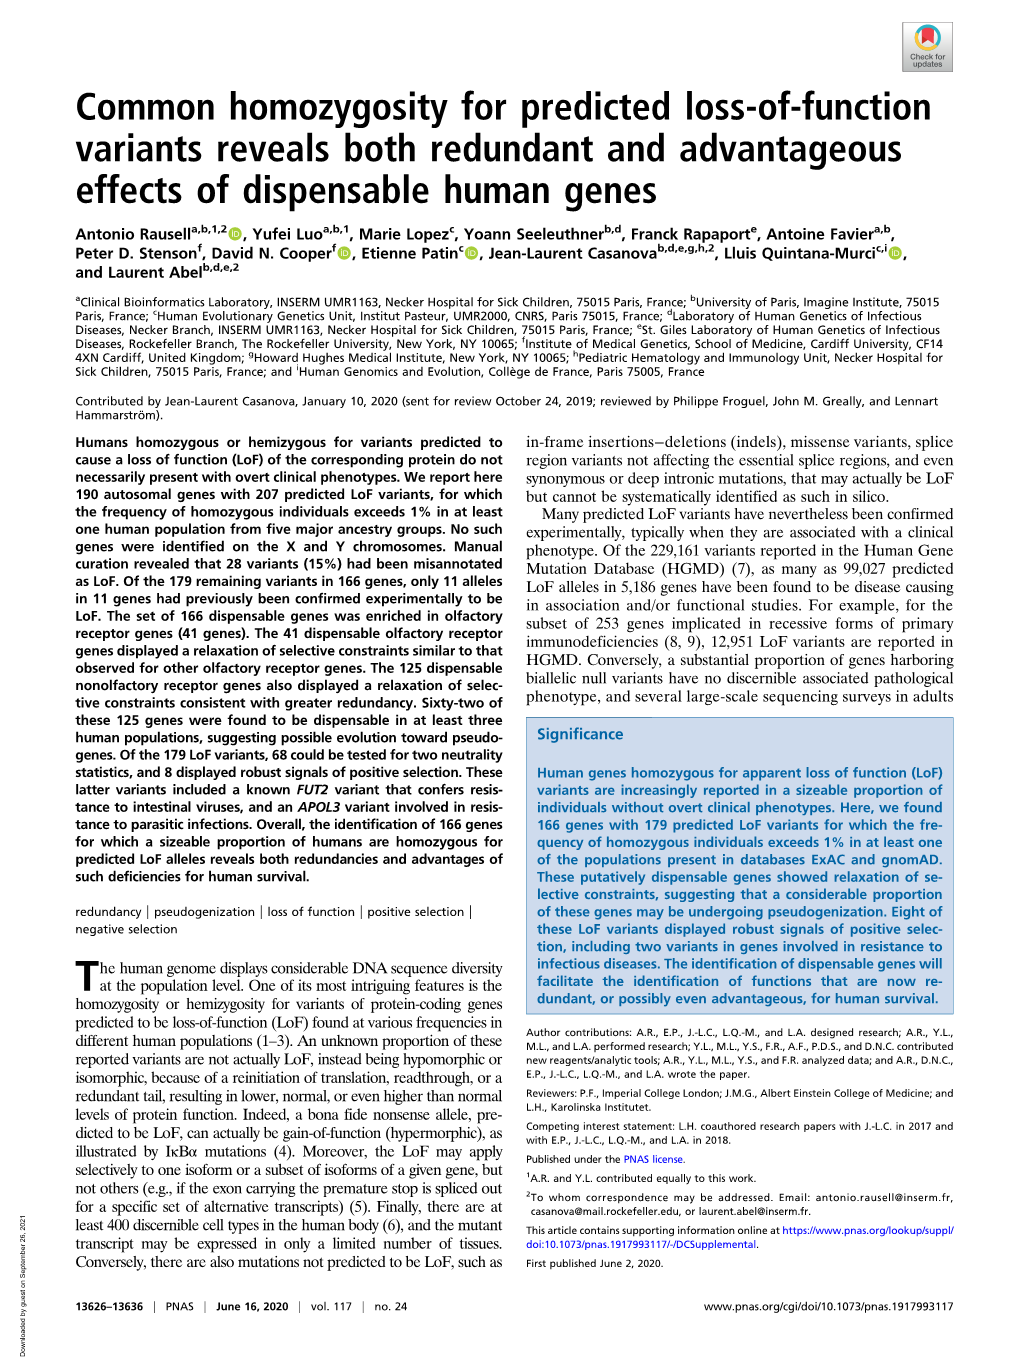 Common Homozygosity for Predicted Loss-Of-Function Variants Reveals Both Redundant and Advantageous Effects of Dispensable Human Genes